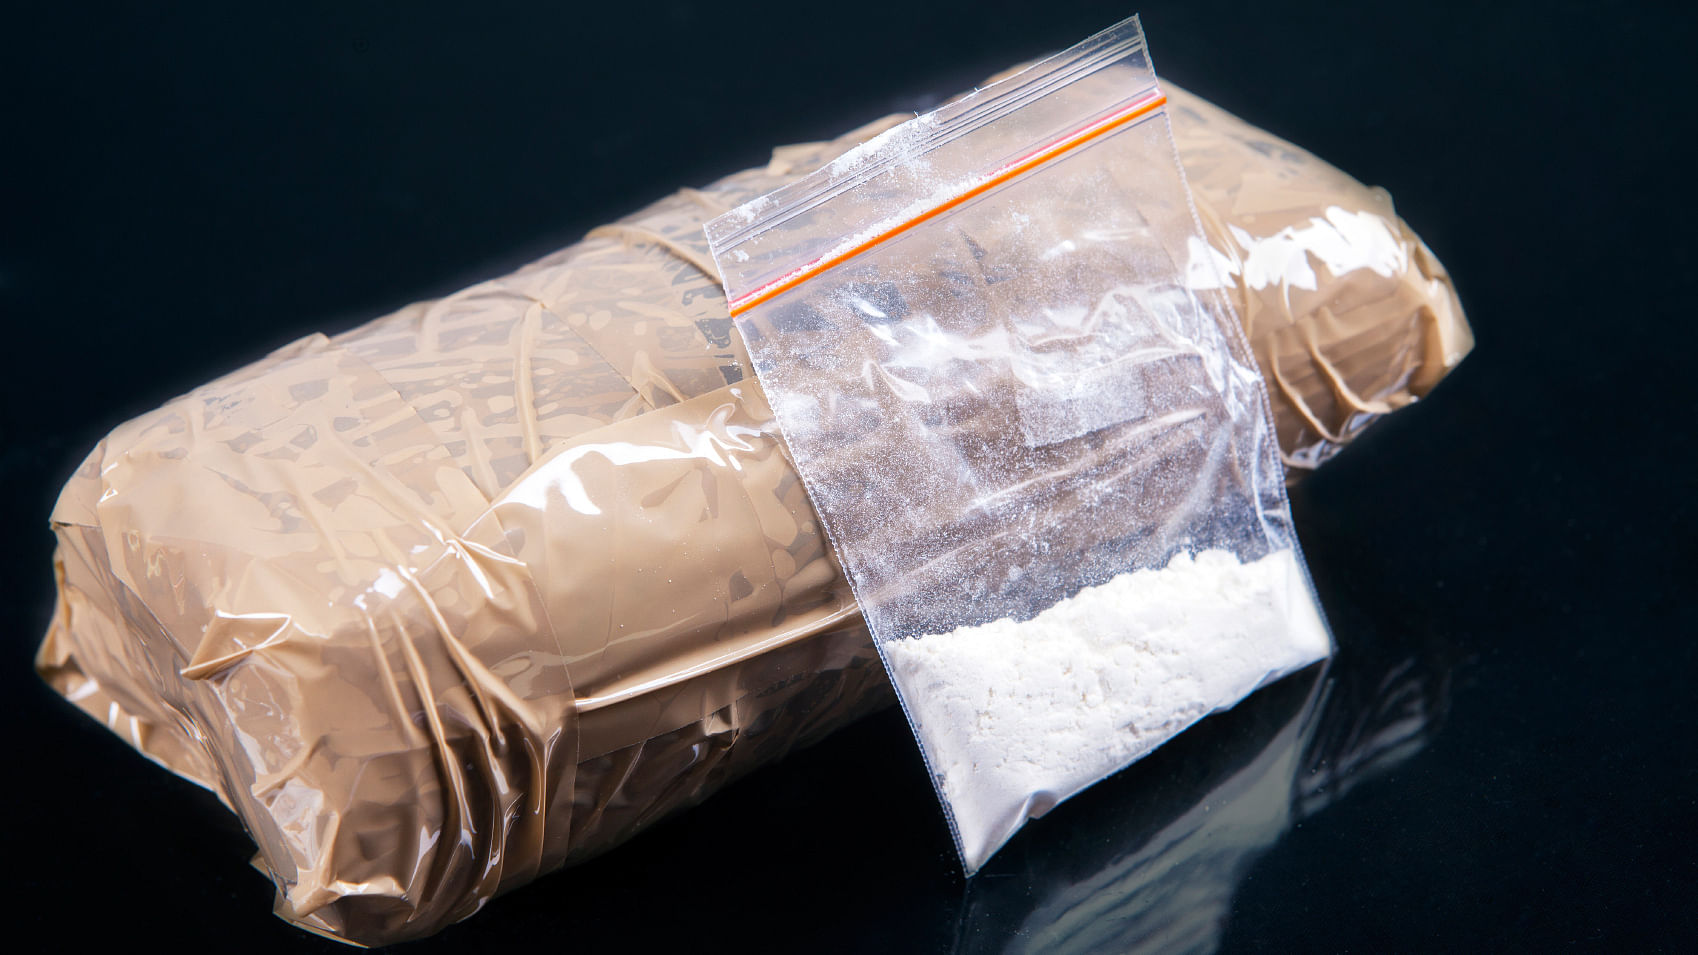 File Photo: Narcotics Intelligence Bureau (NIB) CID on Saturday arrested two graduates who allegedly sold synthetic drugs to people coming to a bar at a hotel in Egmore. Representative image only.